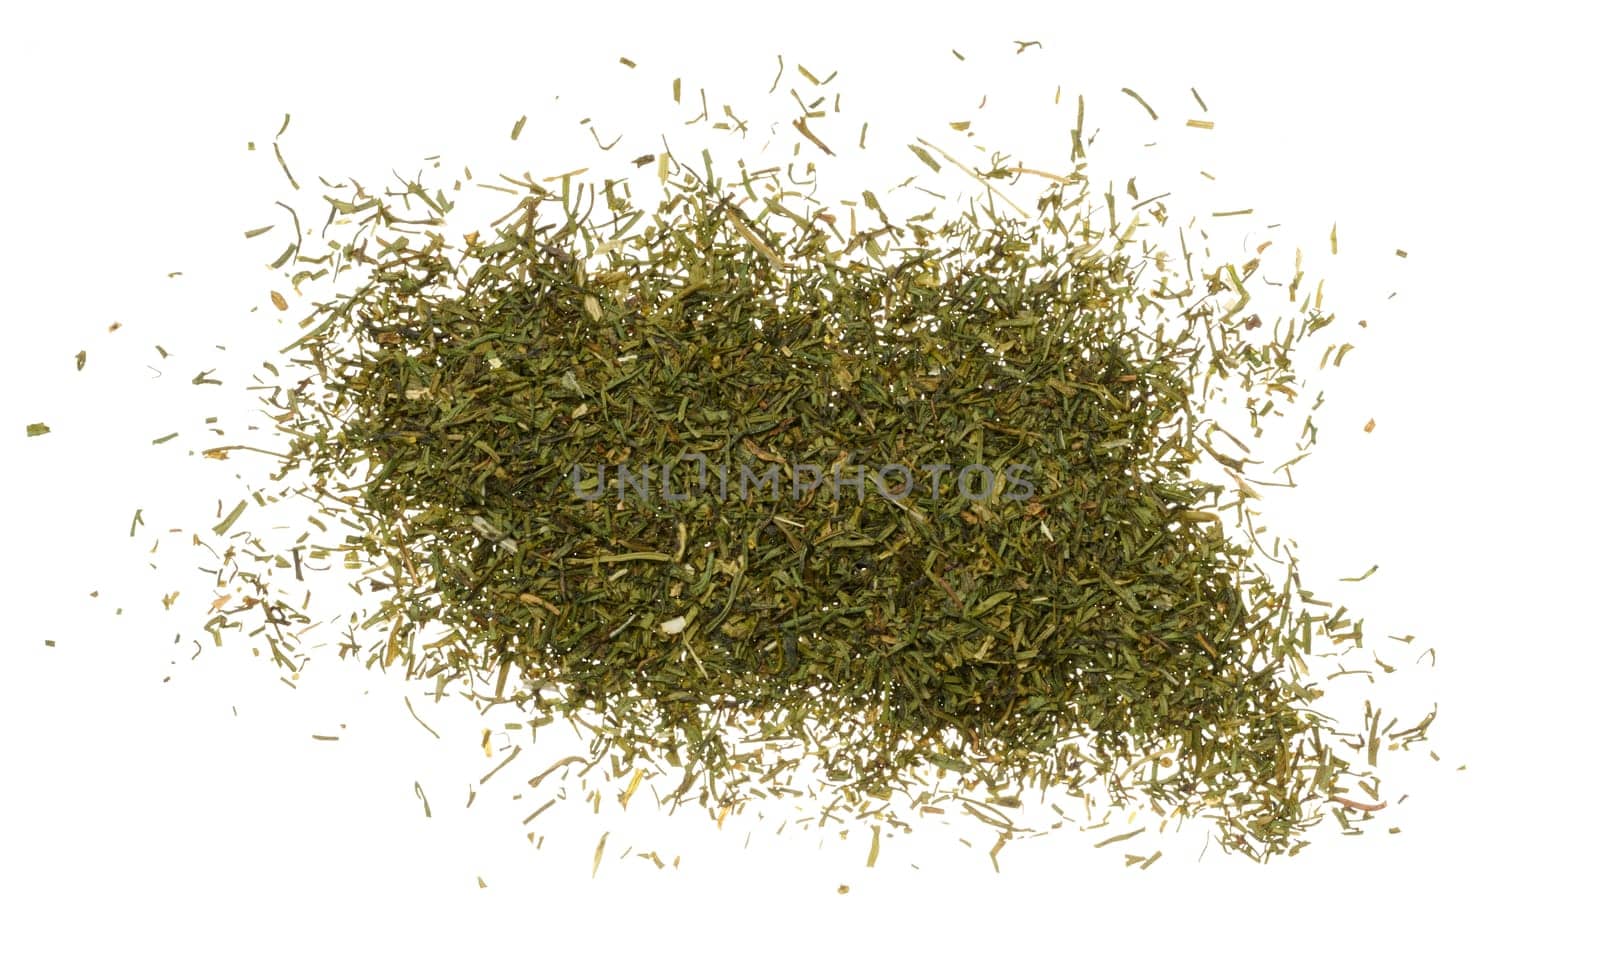 Dried dill scattered on isolated background, top view